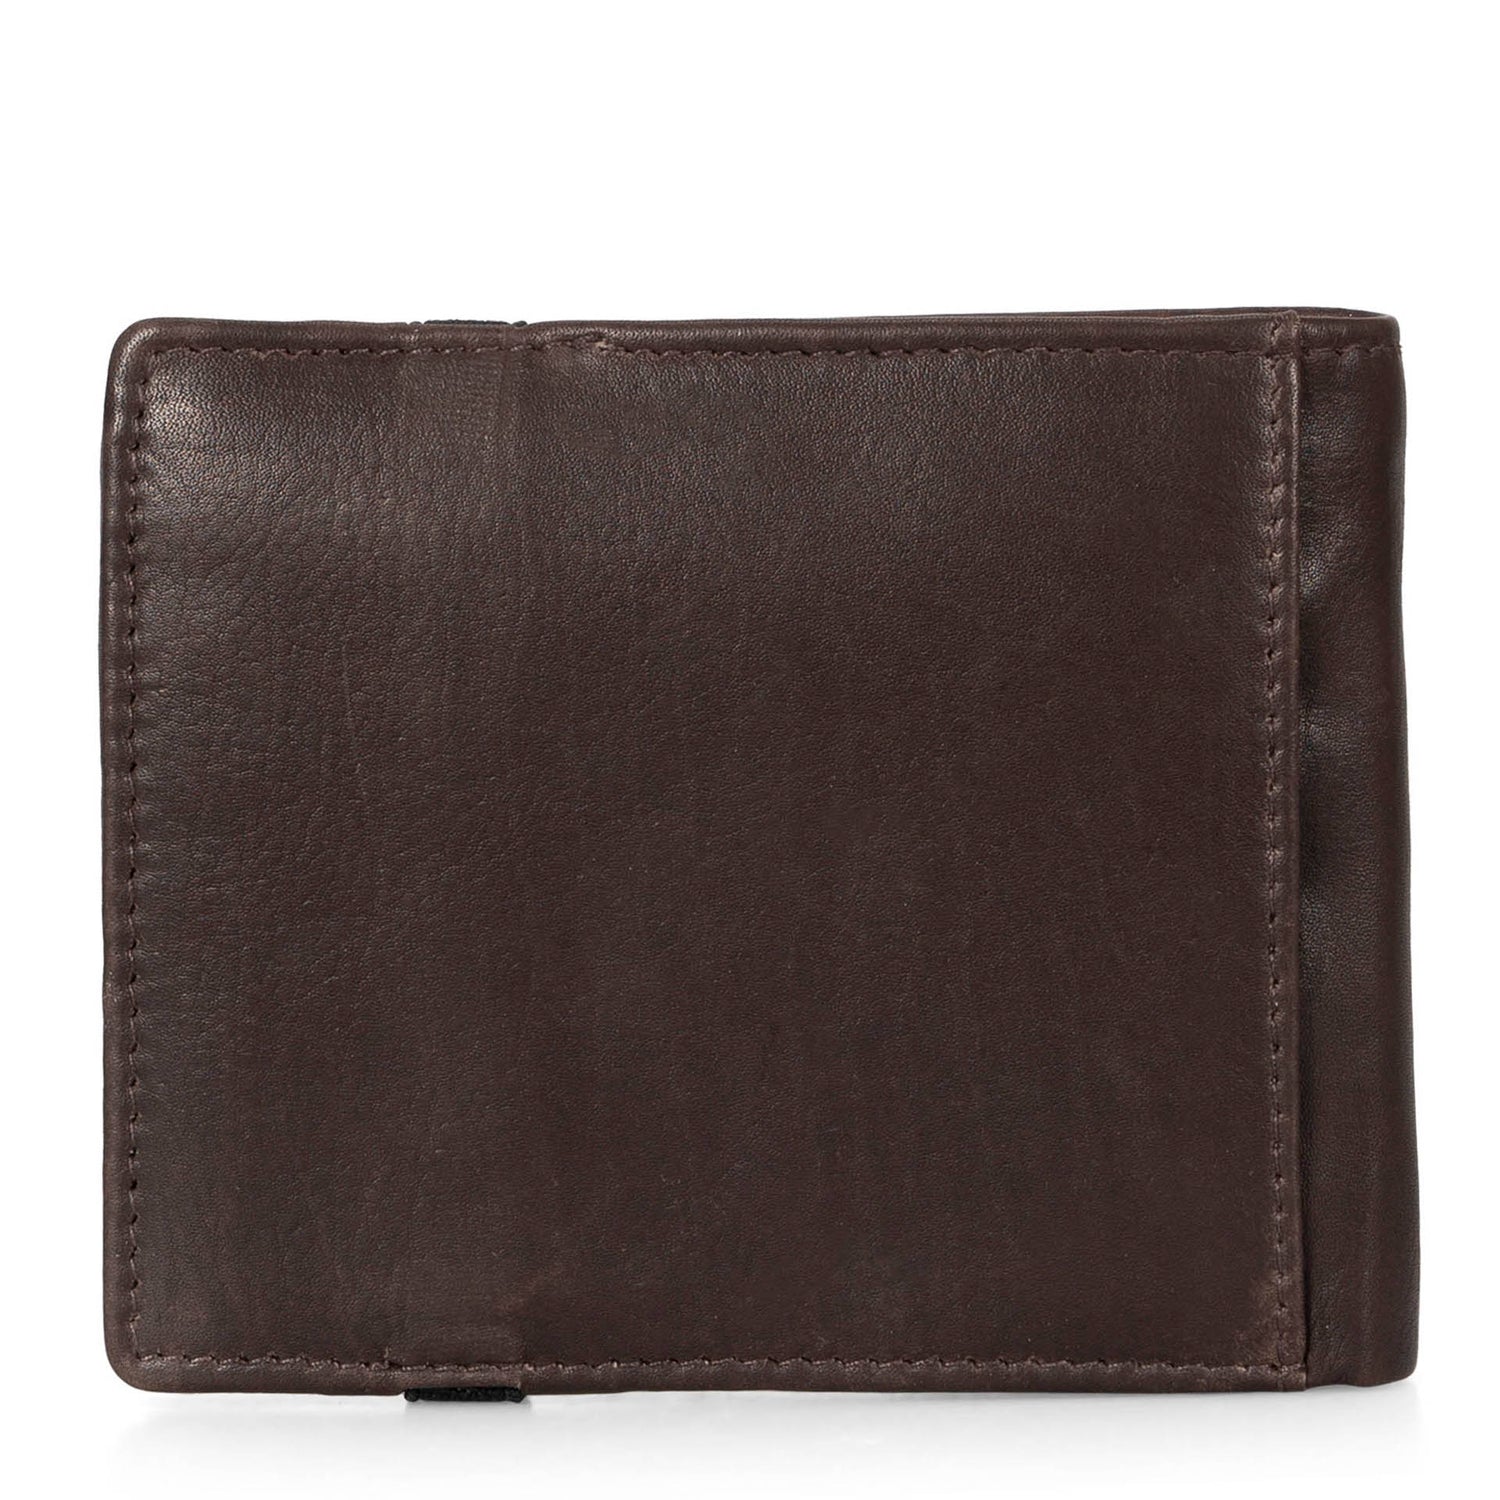 Back side of a brown leather wallet called Hudson designed by Tracker on a white background, showcasing its supple leather.